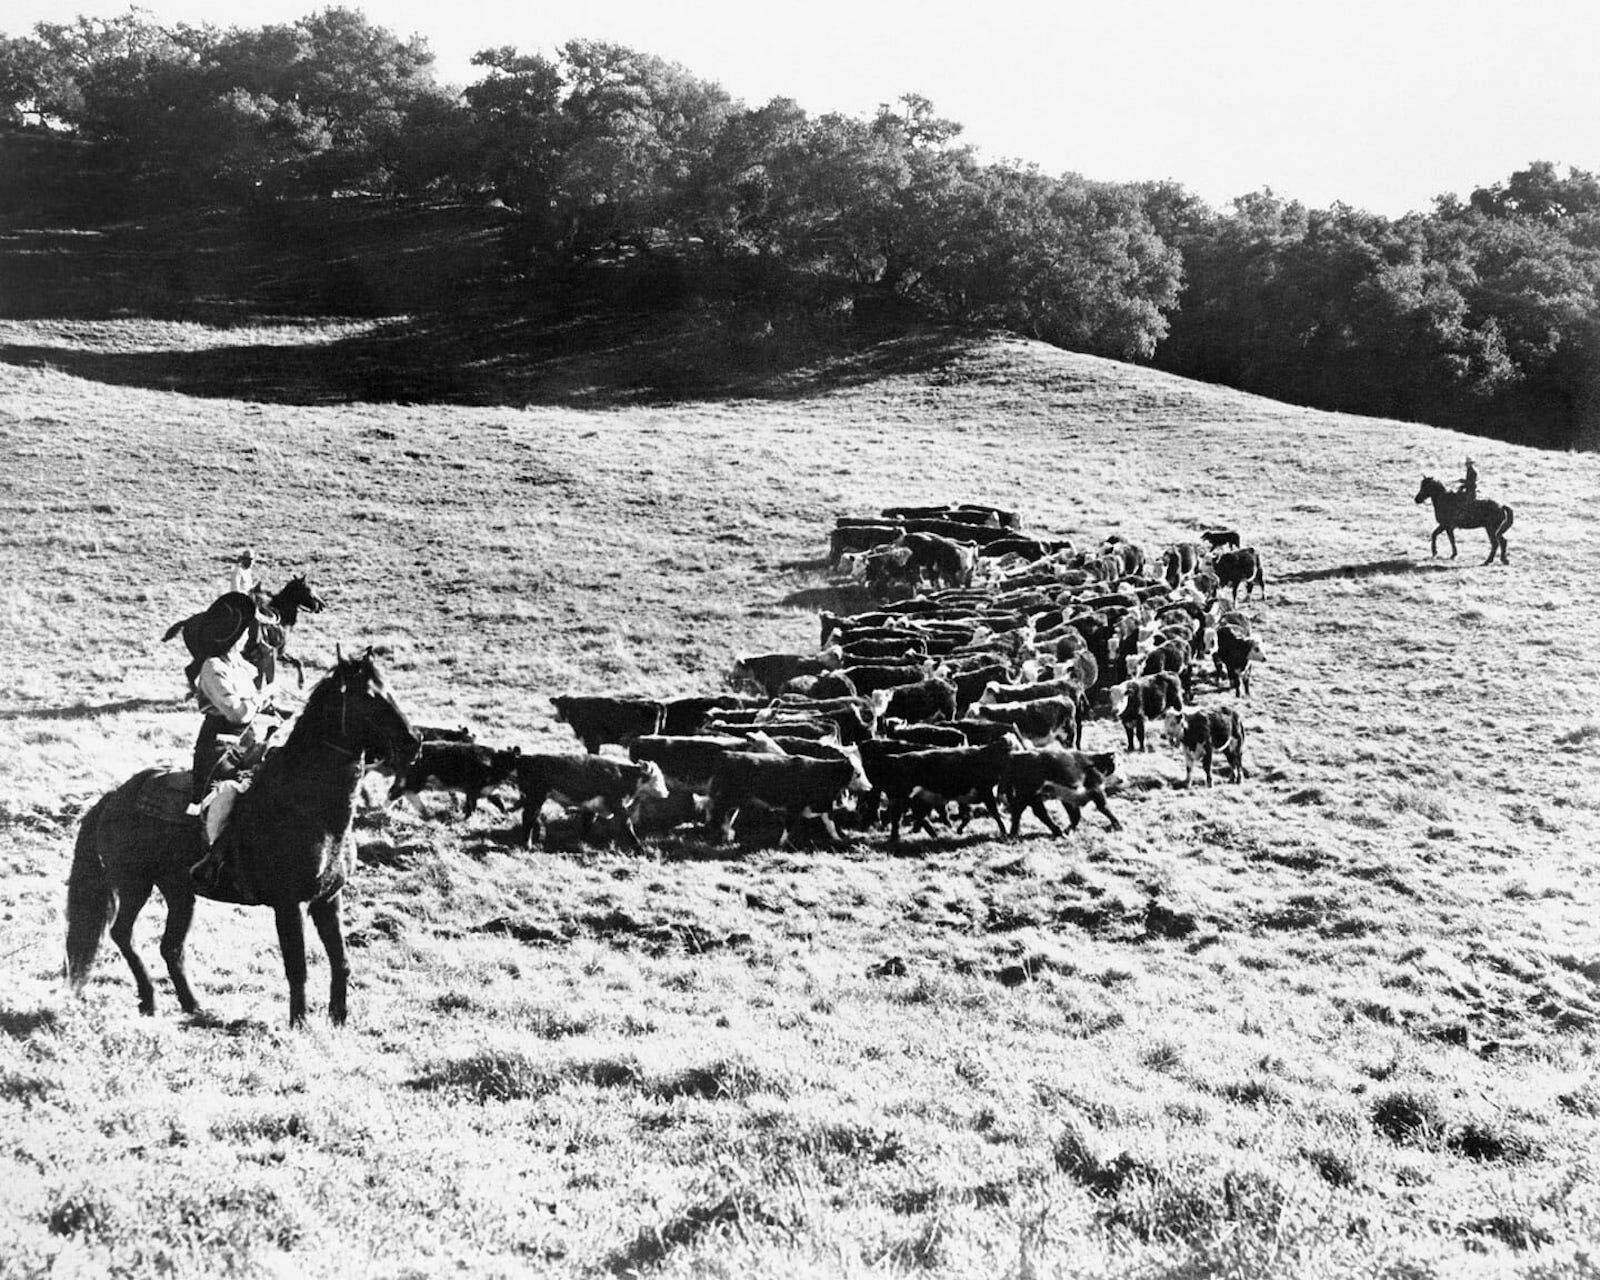 Historical photo of the Alisal California dude ranch with cows and cowboys